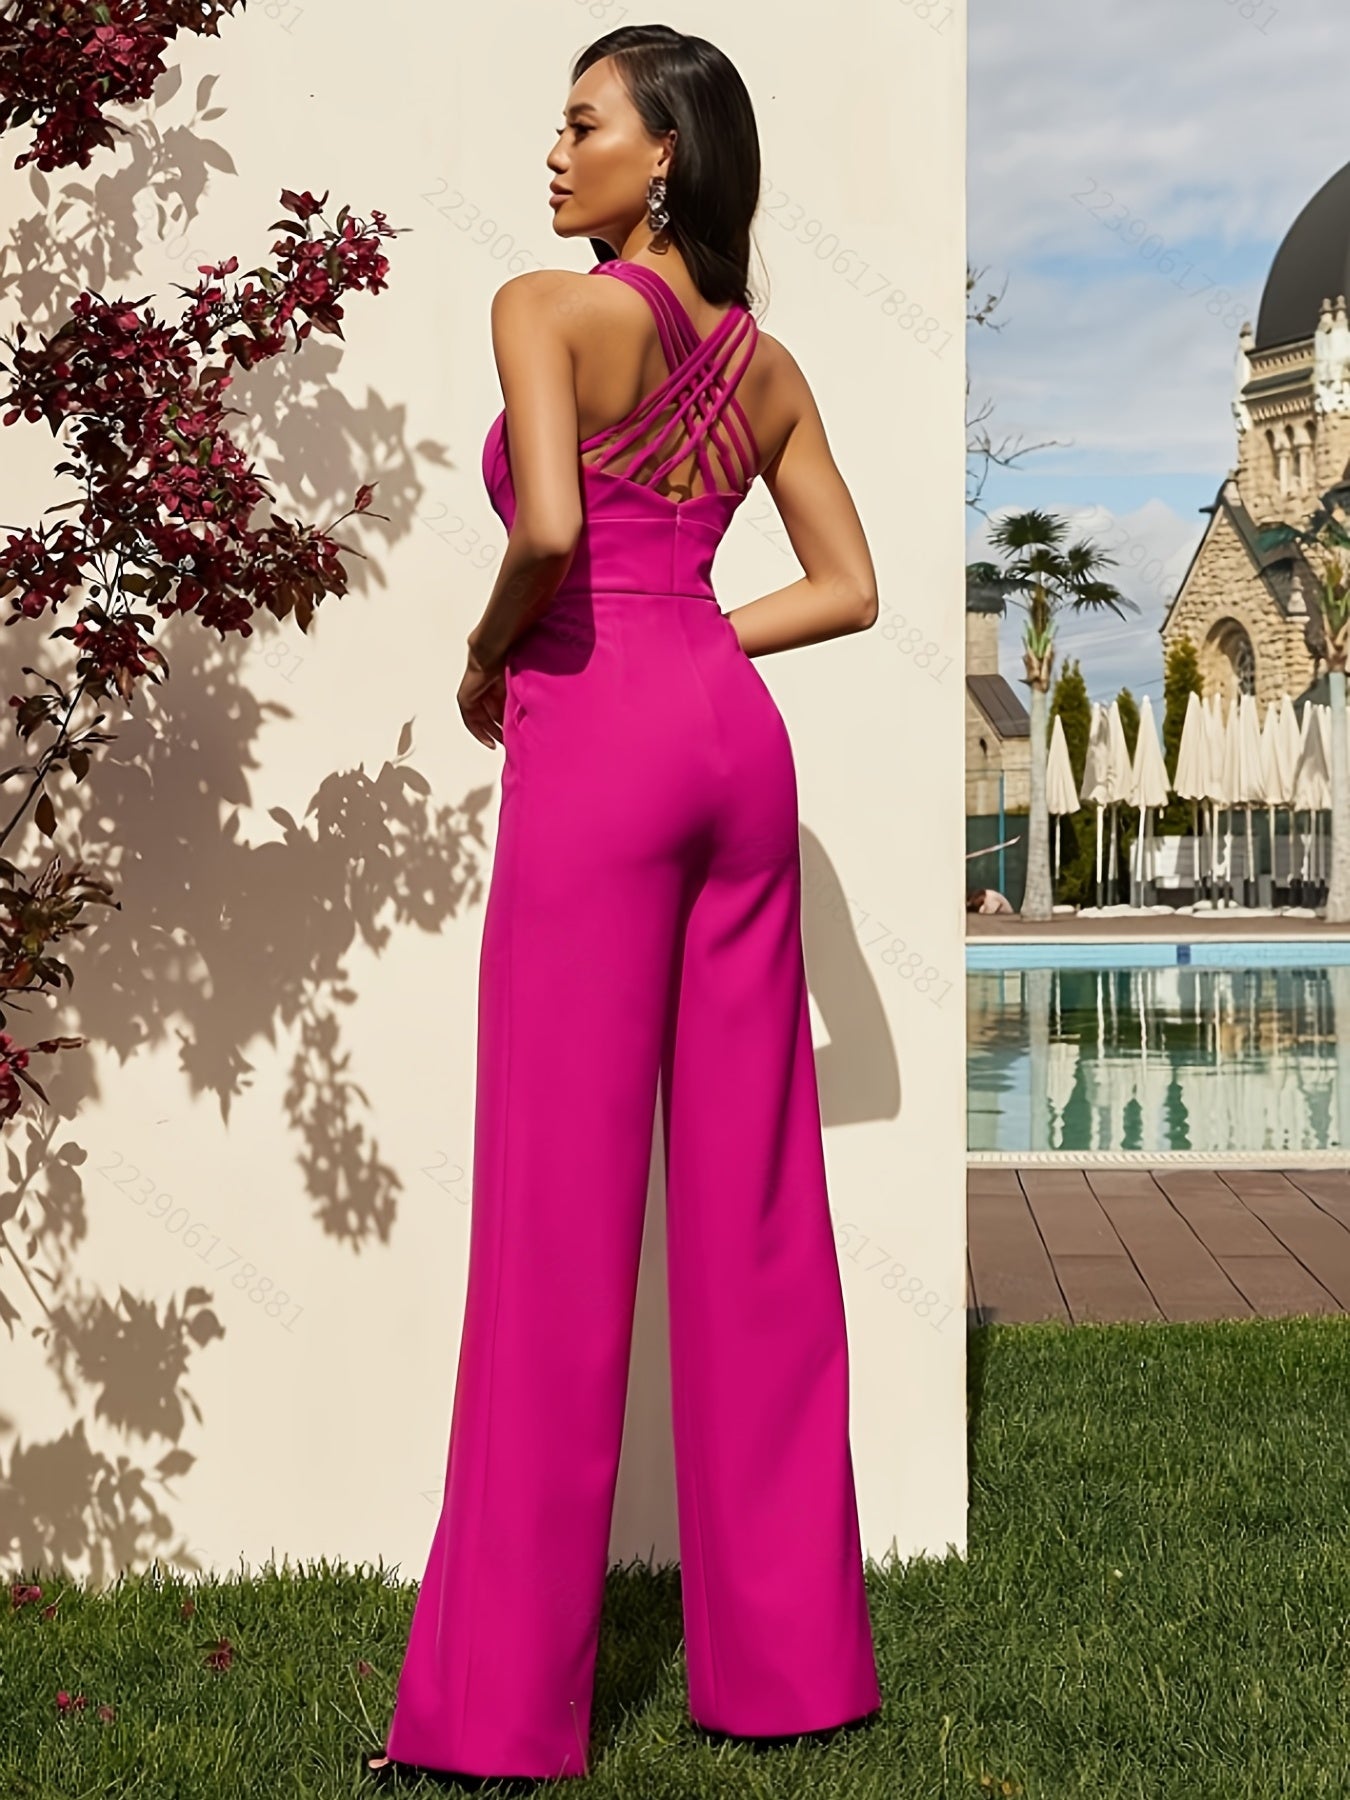 LLstyle Sexy Backless Long Length Flared Leg Jumpsuit